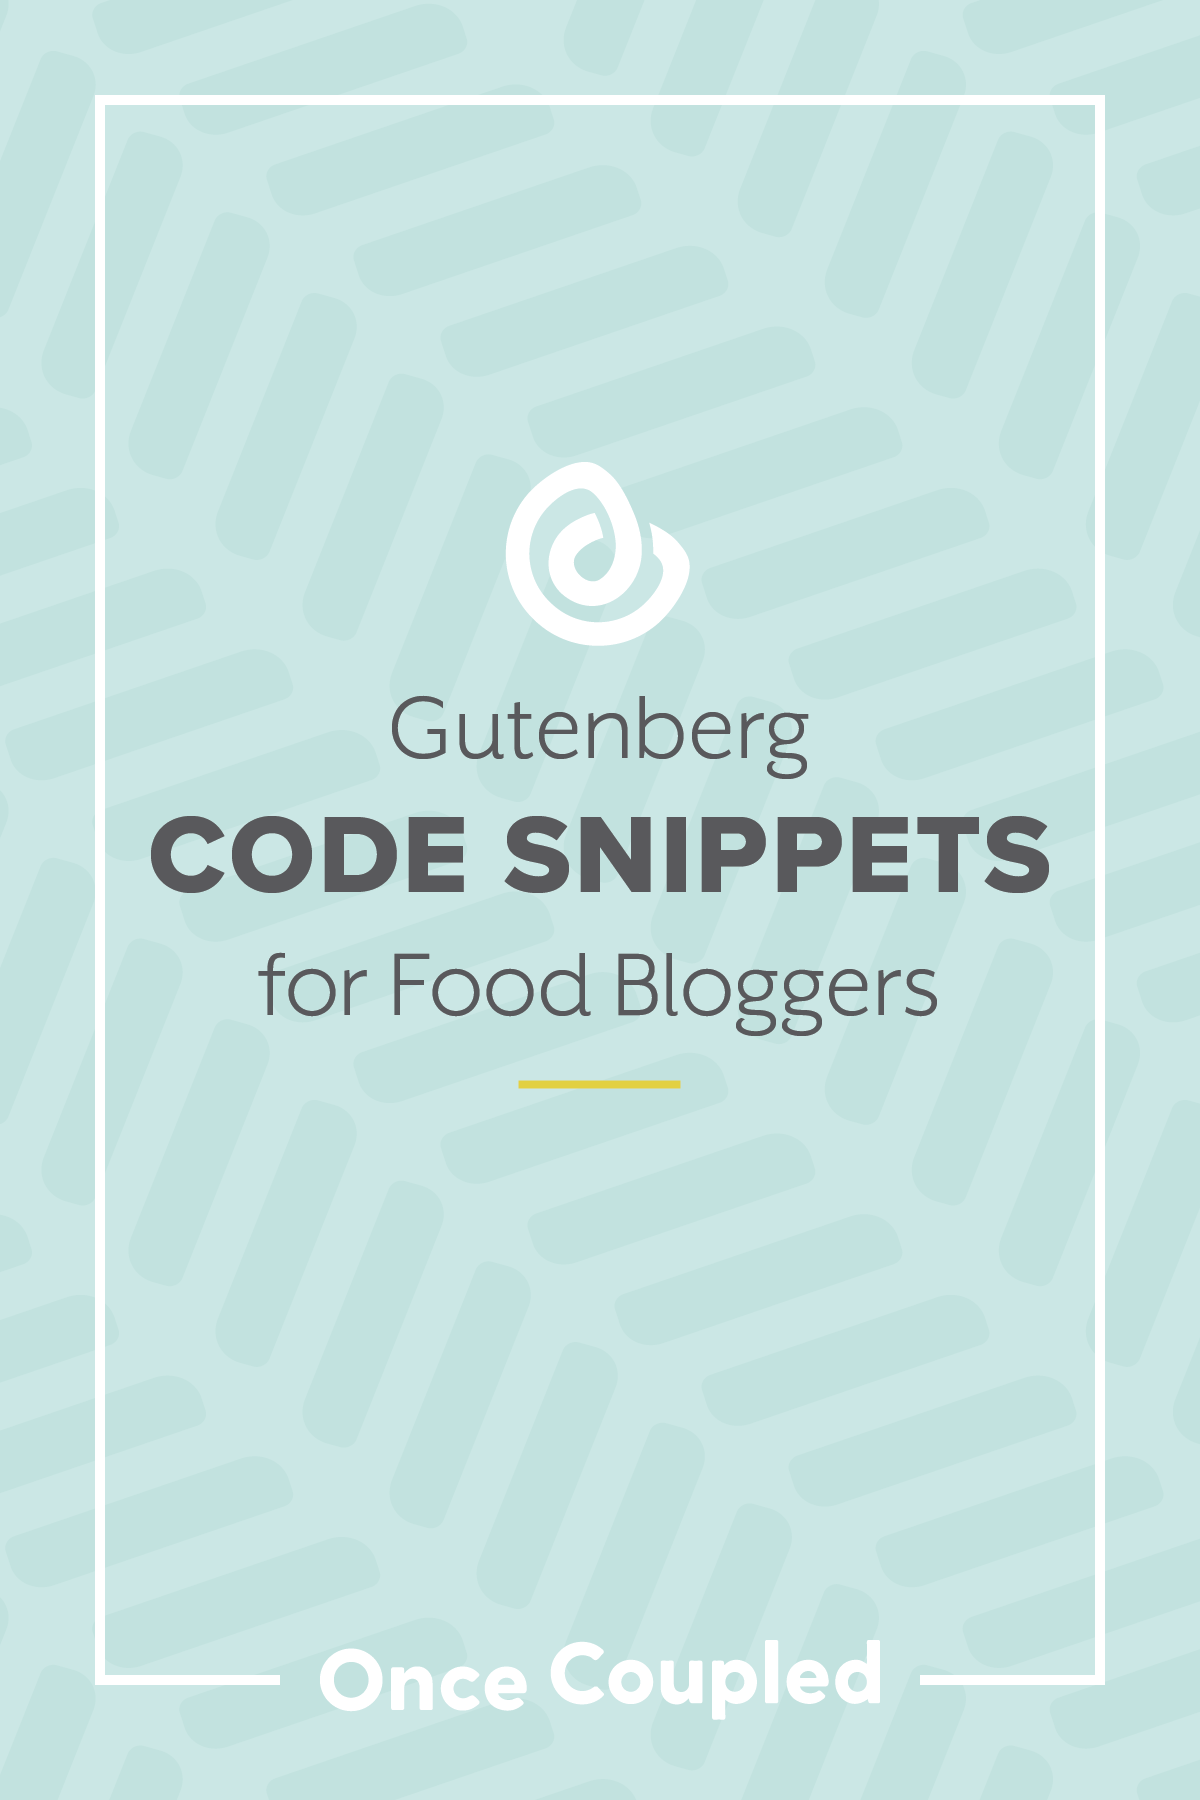 Gutenberg: quirks to be aware of, code snippets, & a free download for testing on your site